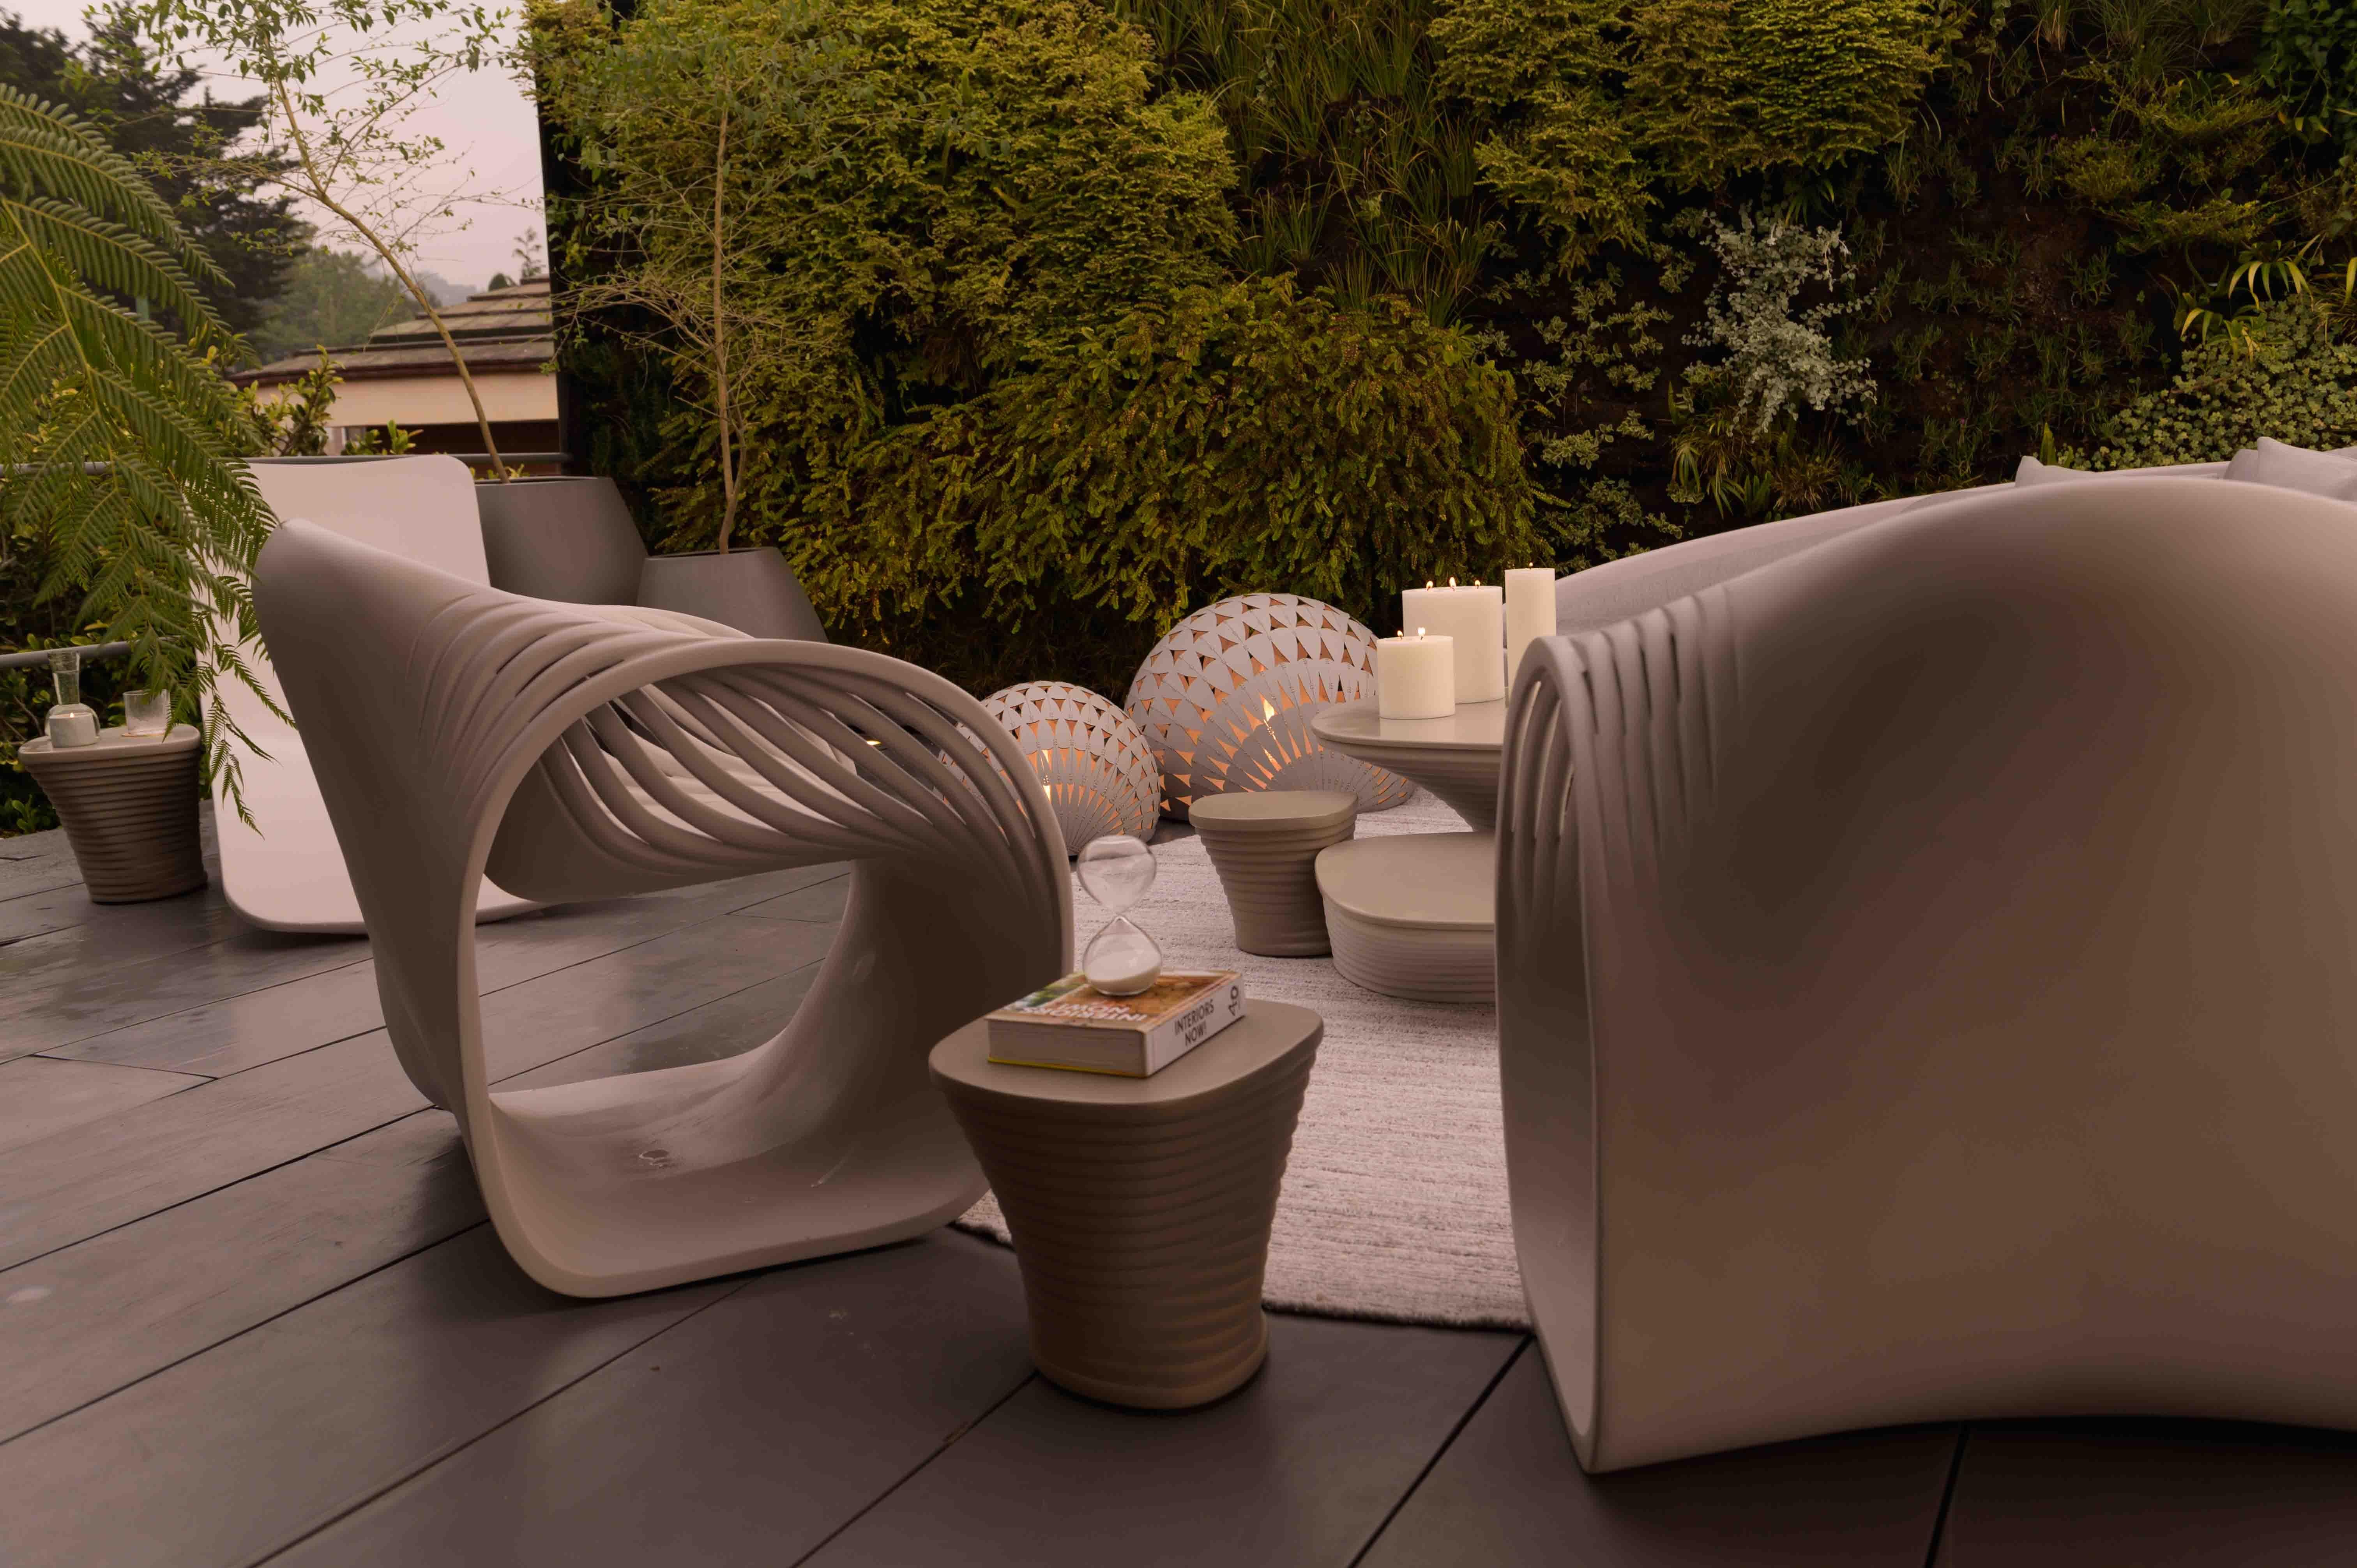 Cast Soave Fiber By Piegatto, a Sculptural Outdoor Chair For Sale